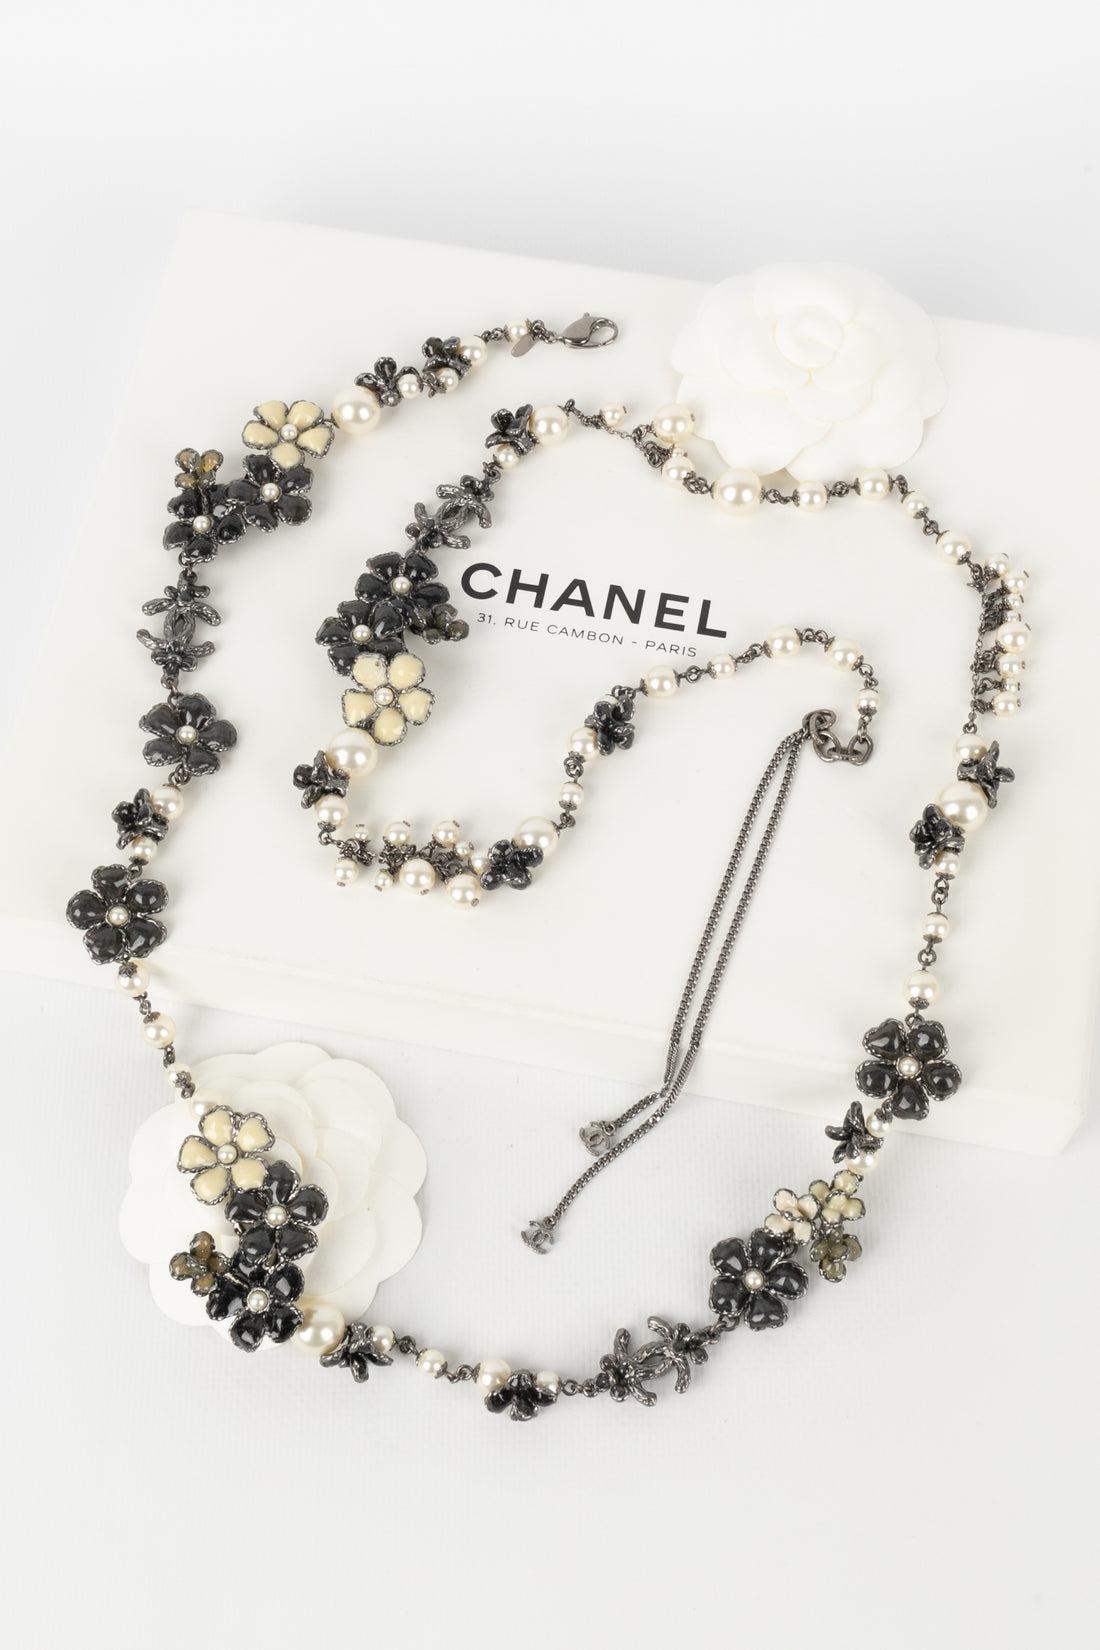 Chanel Silvery Metal Flower Necklace with Costume Pearls and Resin, 2012 For Sale 7